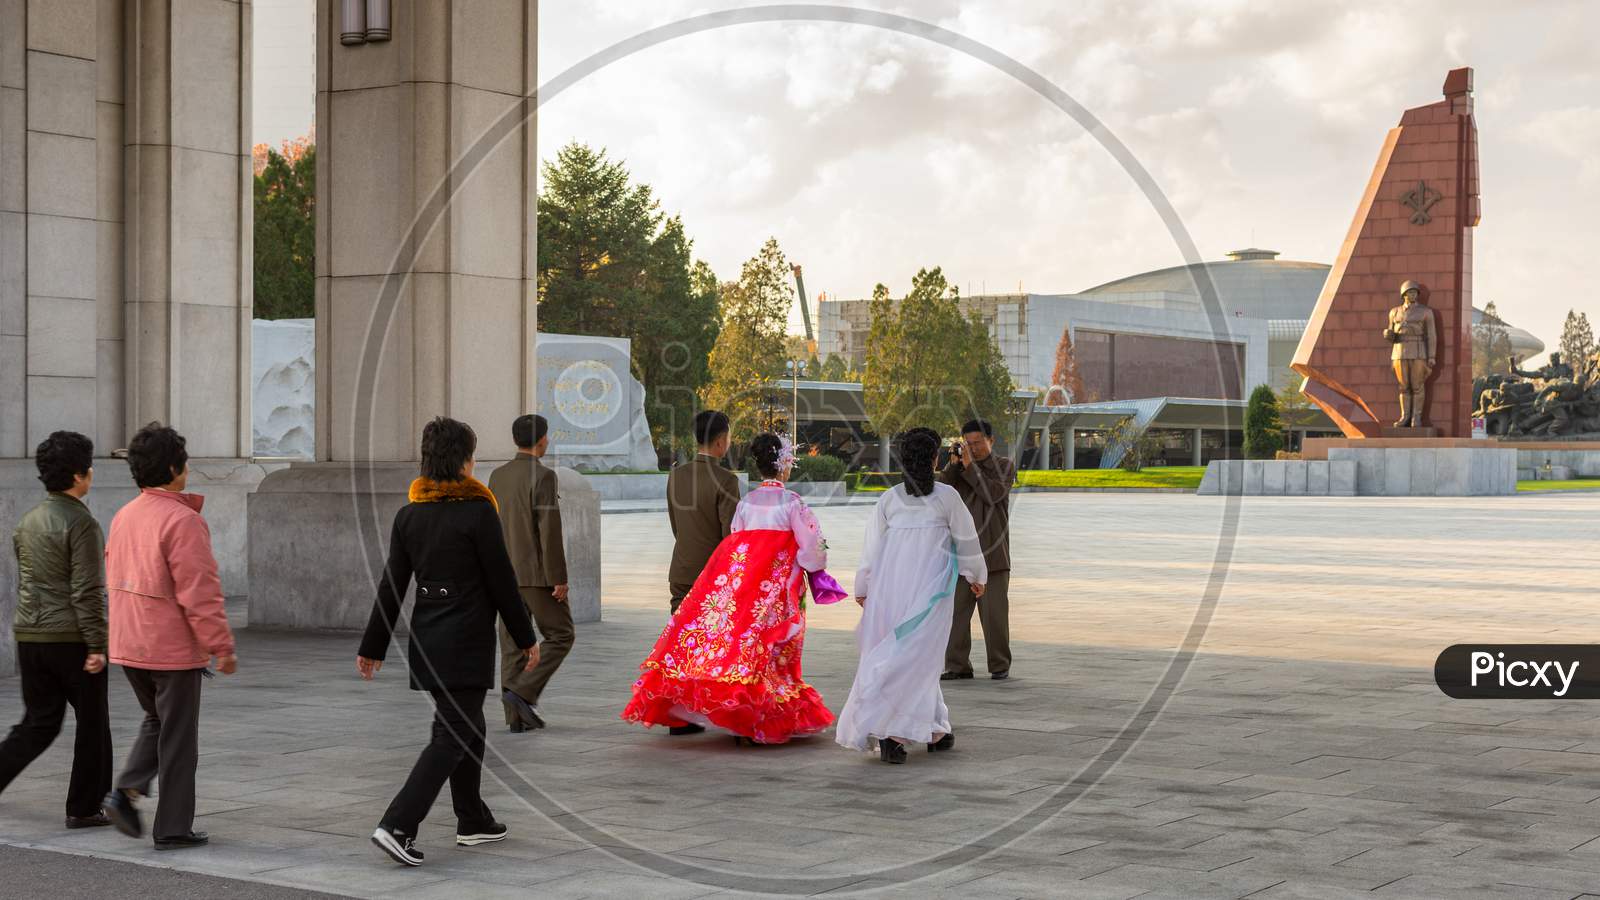 North Korean Wedding Procession Enters The Victorious War Museum Dedicated To The Korean War In Pyongyang